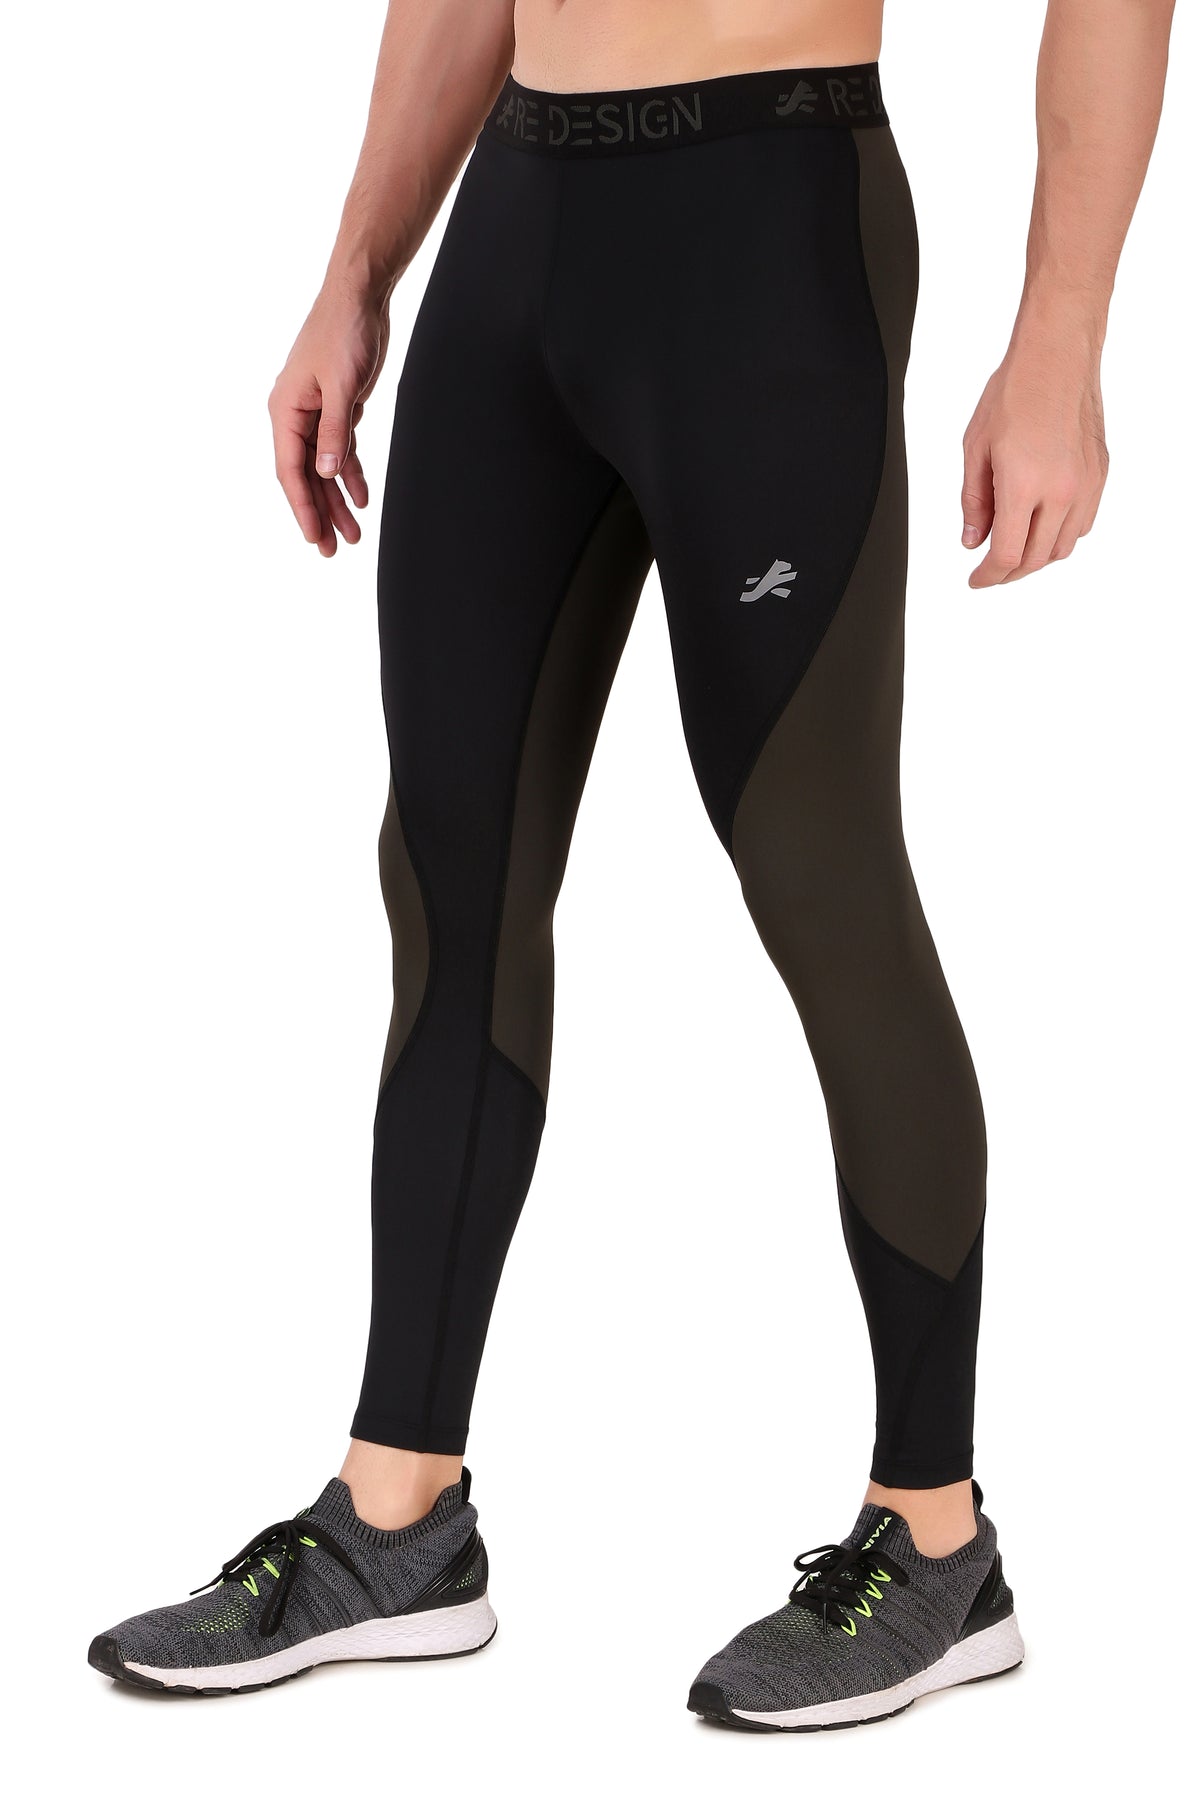 Nylon PB Series Compression Pant and Full Tights For Men (Black/Olive)